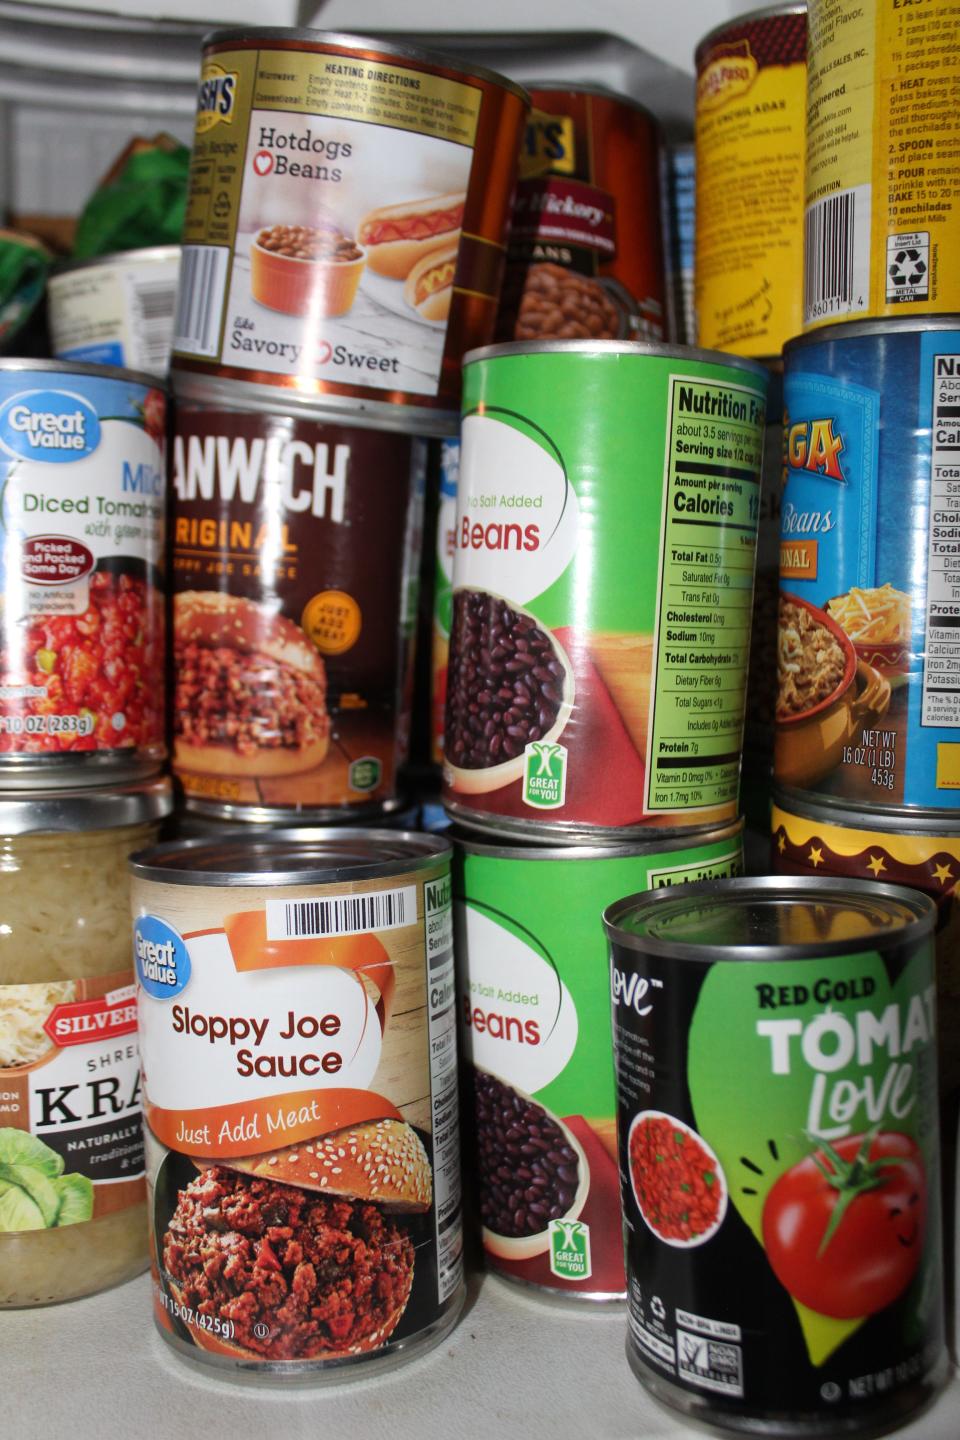 The goal of this food drive is to help restock the shelves of several local food pantries.